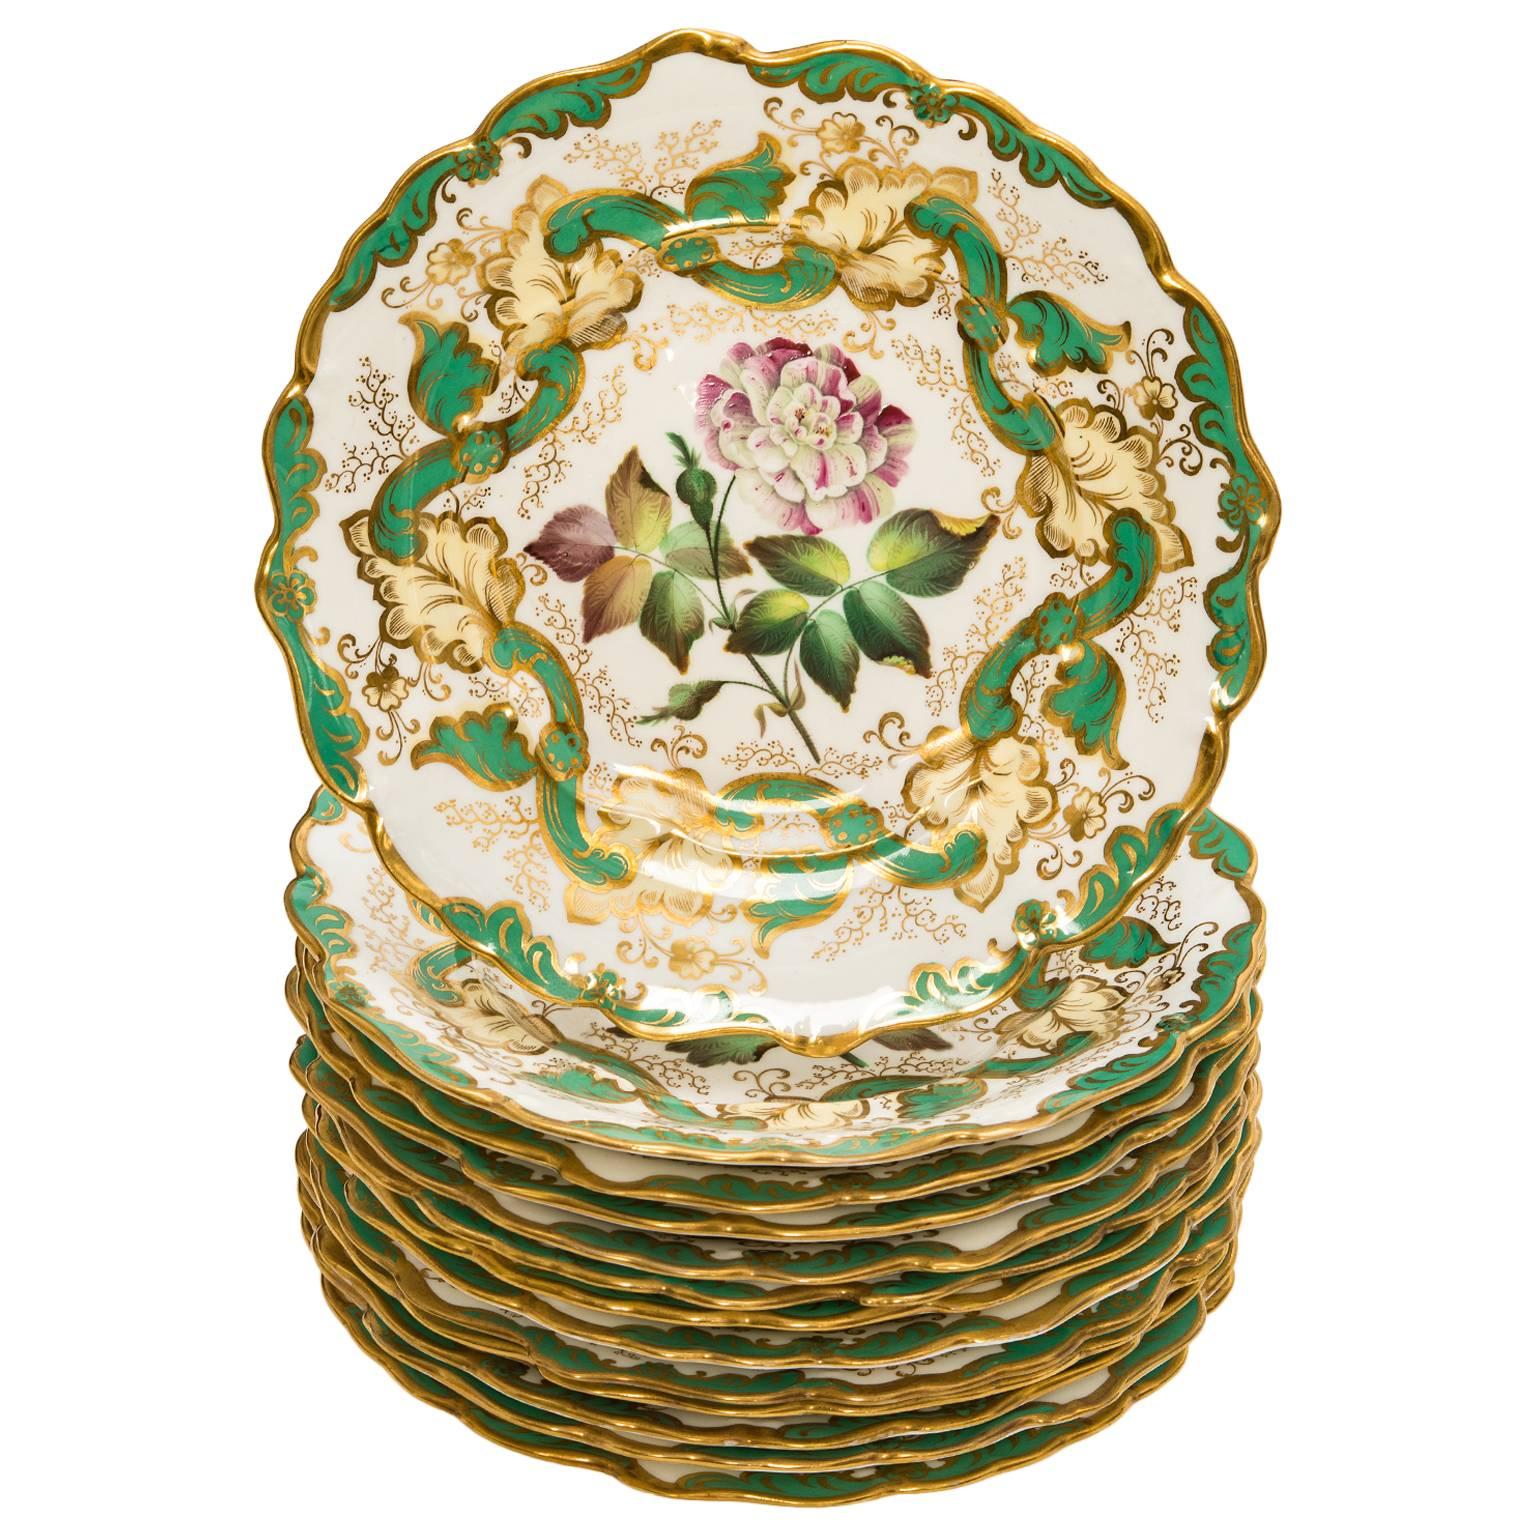 Circa 1840s, England.  This gorgeous mid-nineteenth-century Staffordshire dessert set features hand-painted floral motifs accented by a green and gold border. Elegantly charming, each brightly cheerful piece is decorated with a unique image that